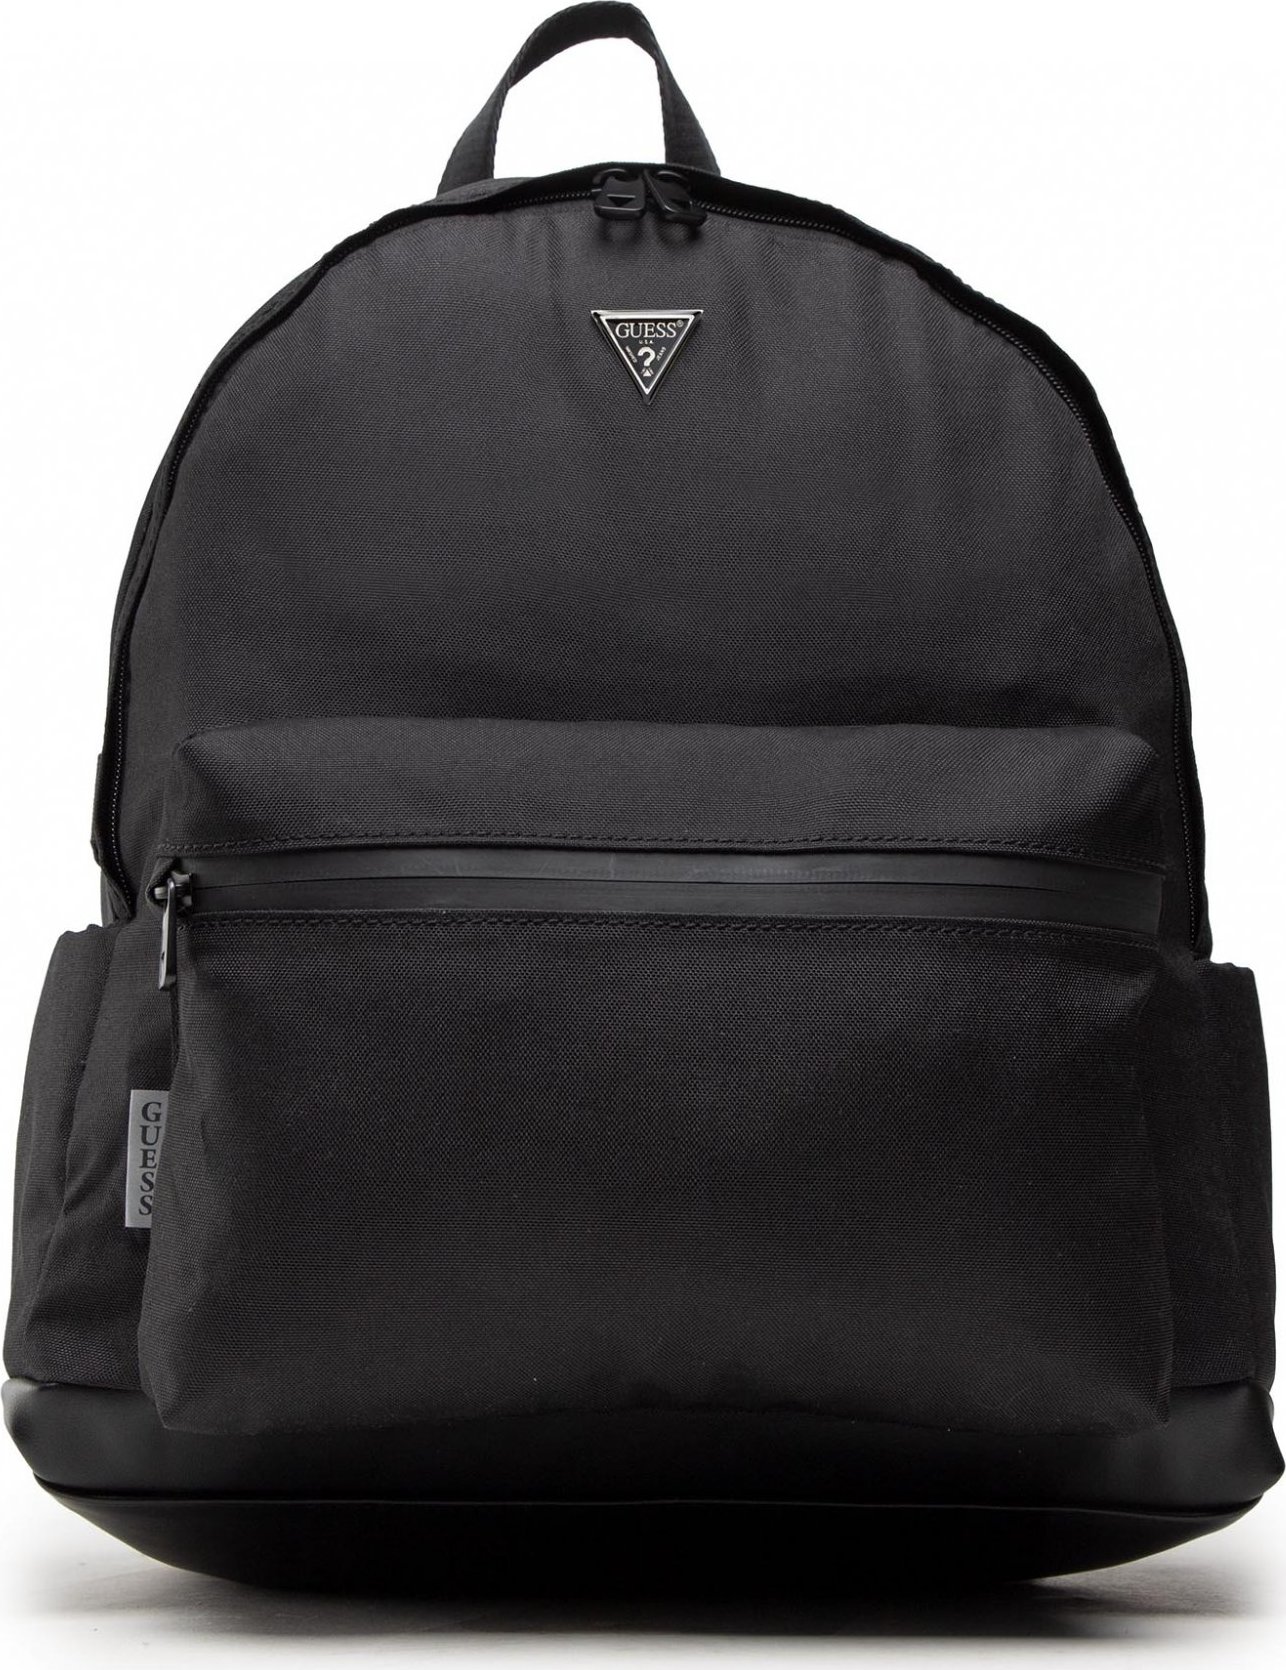 Guess Vice Round Backpack HMEVIC P2175